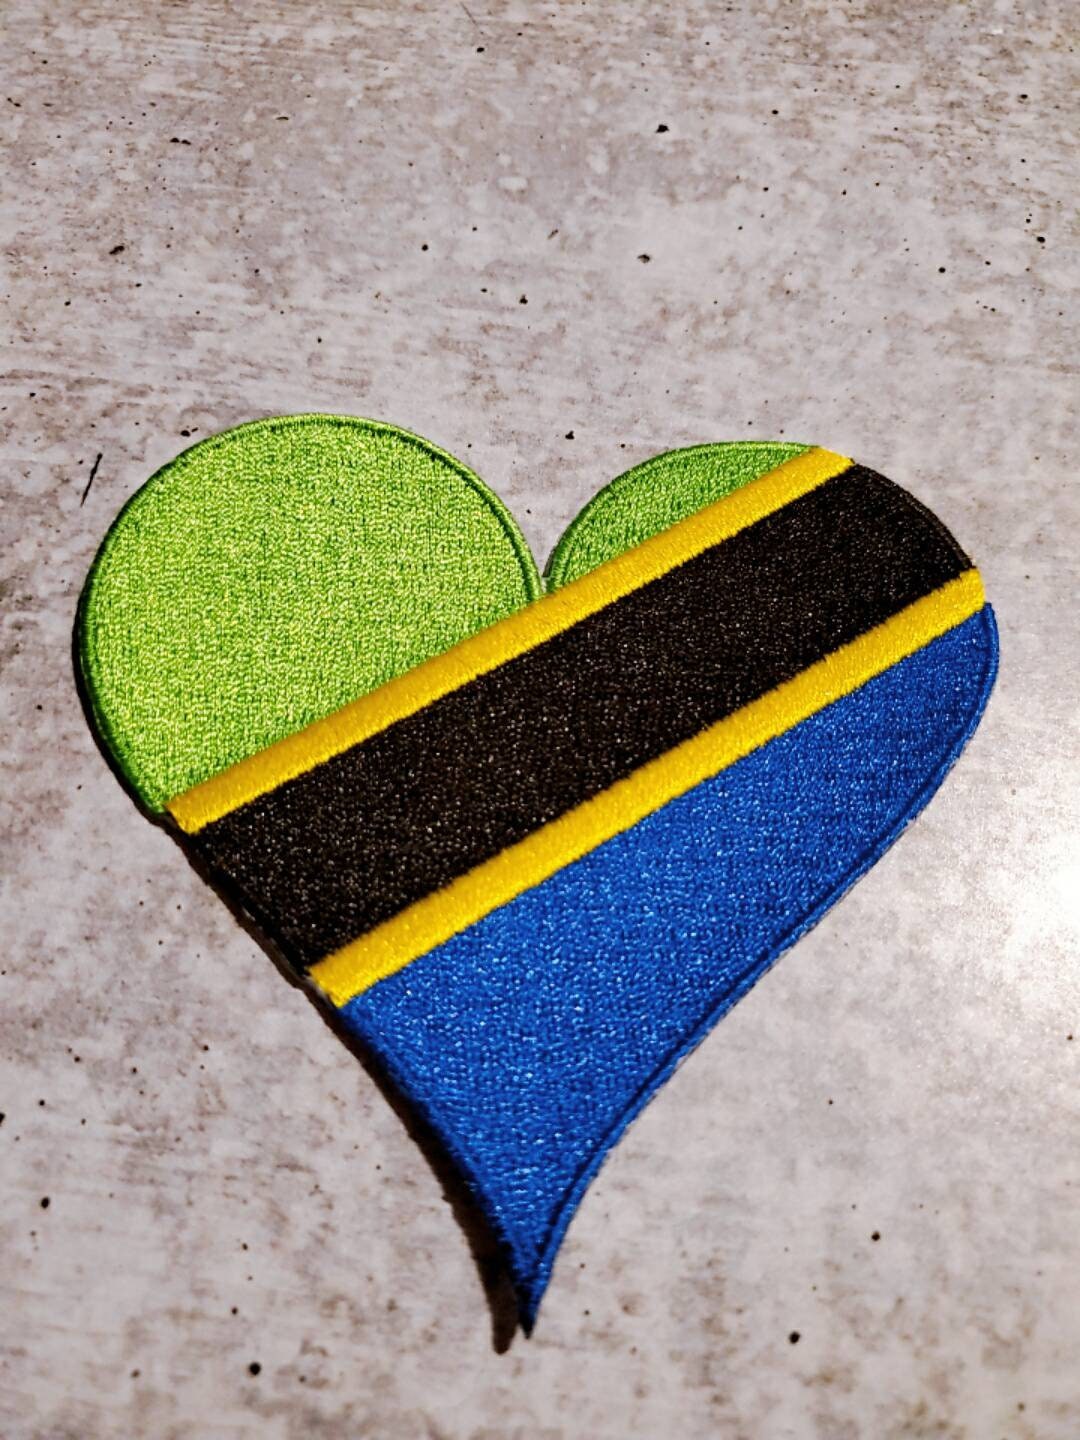 NEW, Collectable "Tanzanian-African Flag" Iron-On 100% Embroidered Afrocentric Patch; Juneteenth, Blue, Green, and Black, 4"